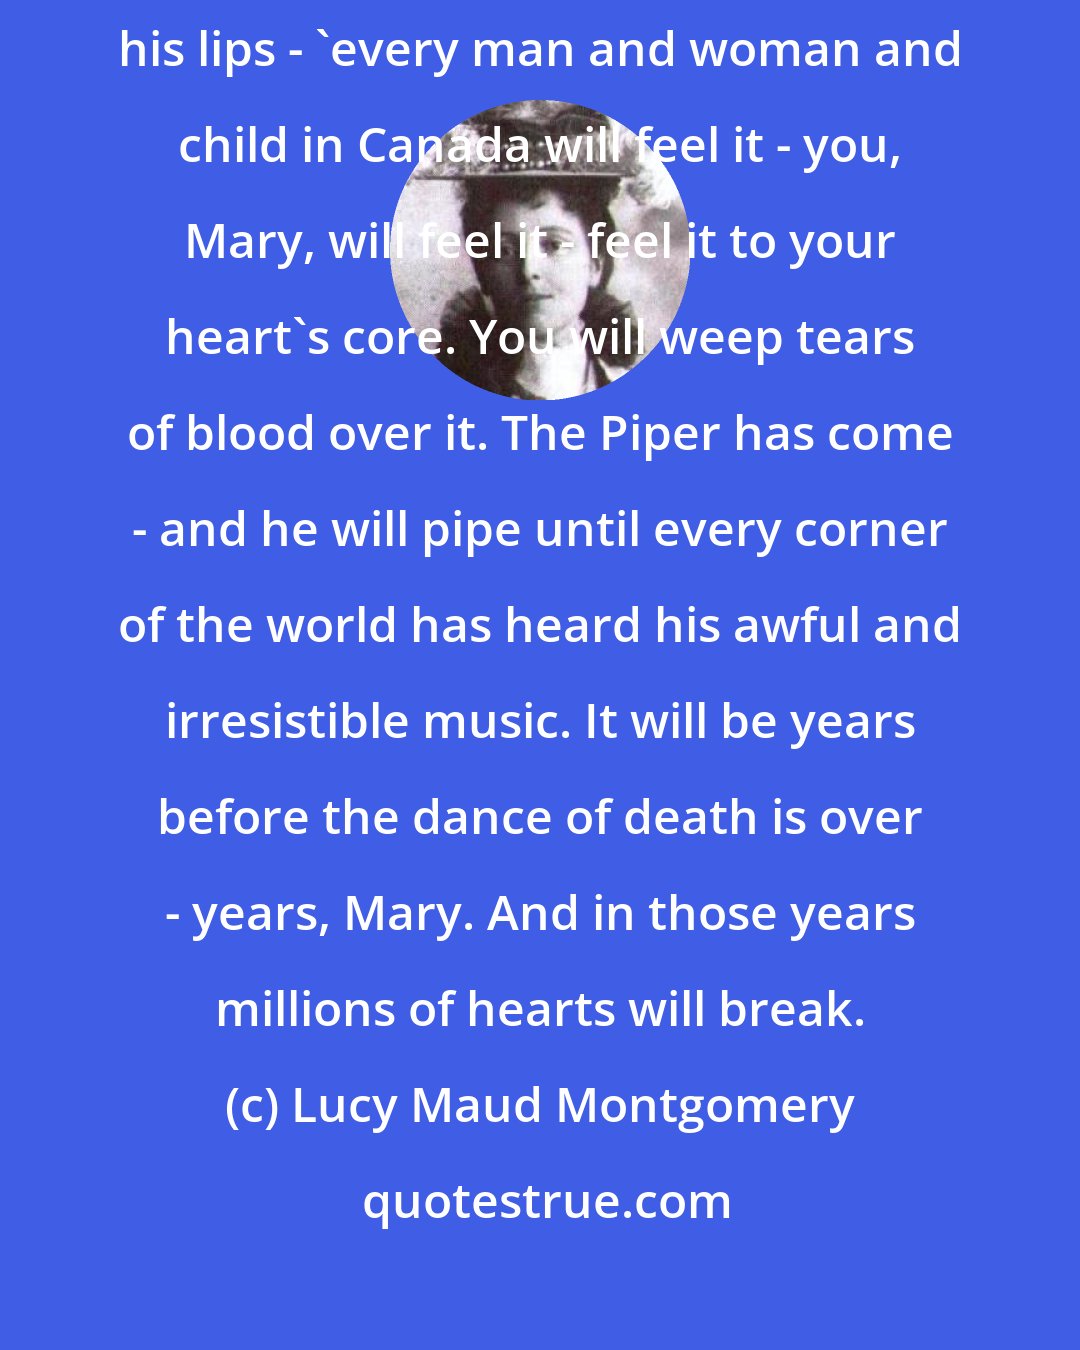 Lucy Maud Montgomery: Before this war is over,' [Walter] said - or something said through his lips - 'every man and woman and child in Canada will feel it - you, Mary, will feel it - feel it to your heart's core. You will weep tears of blood over it. The Piper has come - and he will pipe until every corner of the world has heard his awful and irresistible music. It will be years before the dance of death is over - years, Mary. And in those years millions of hearts will break.